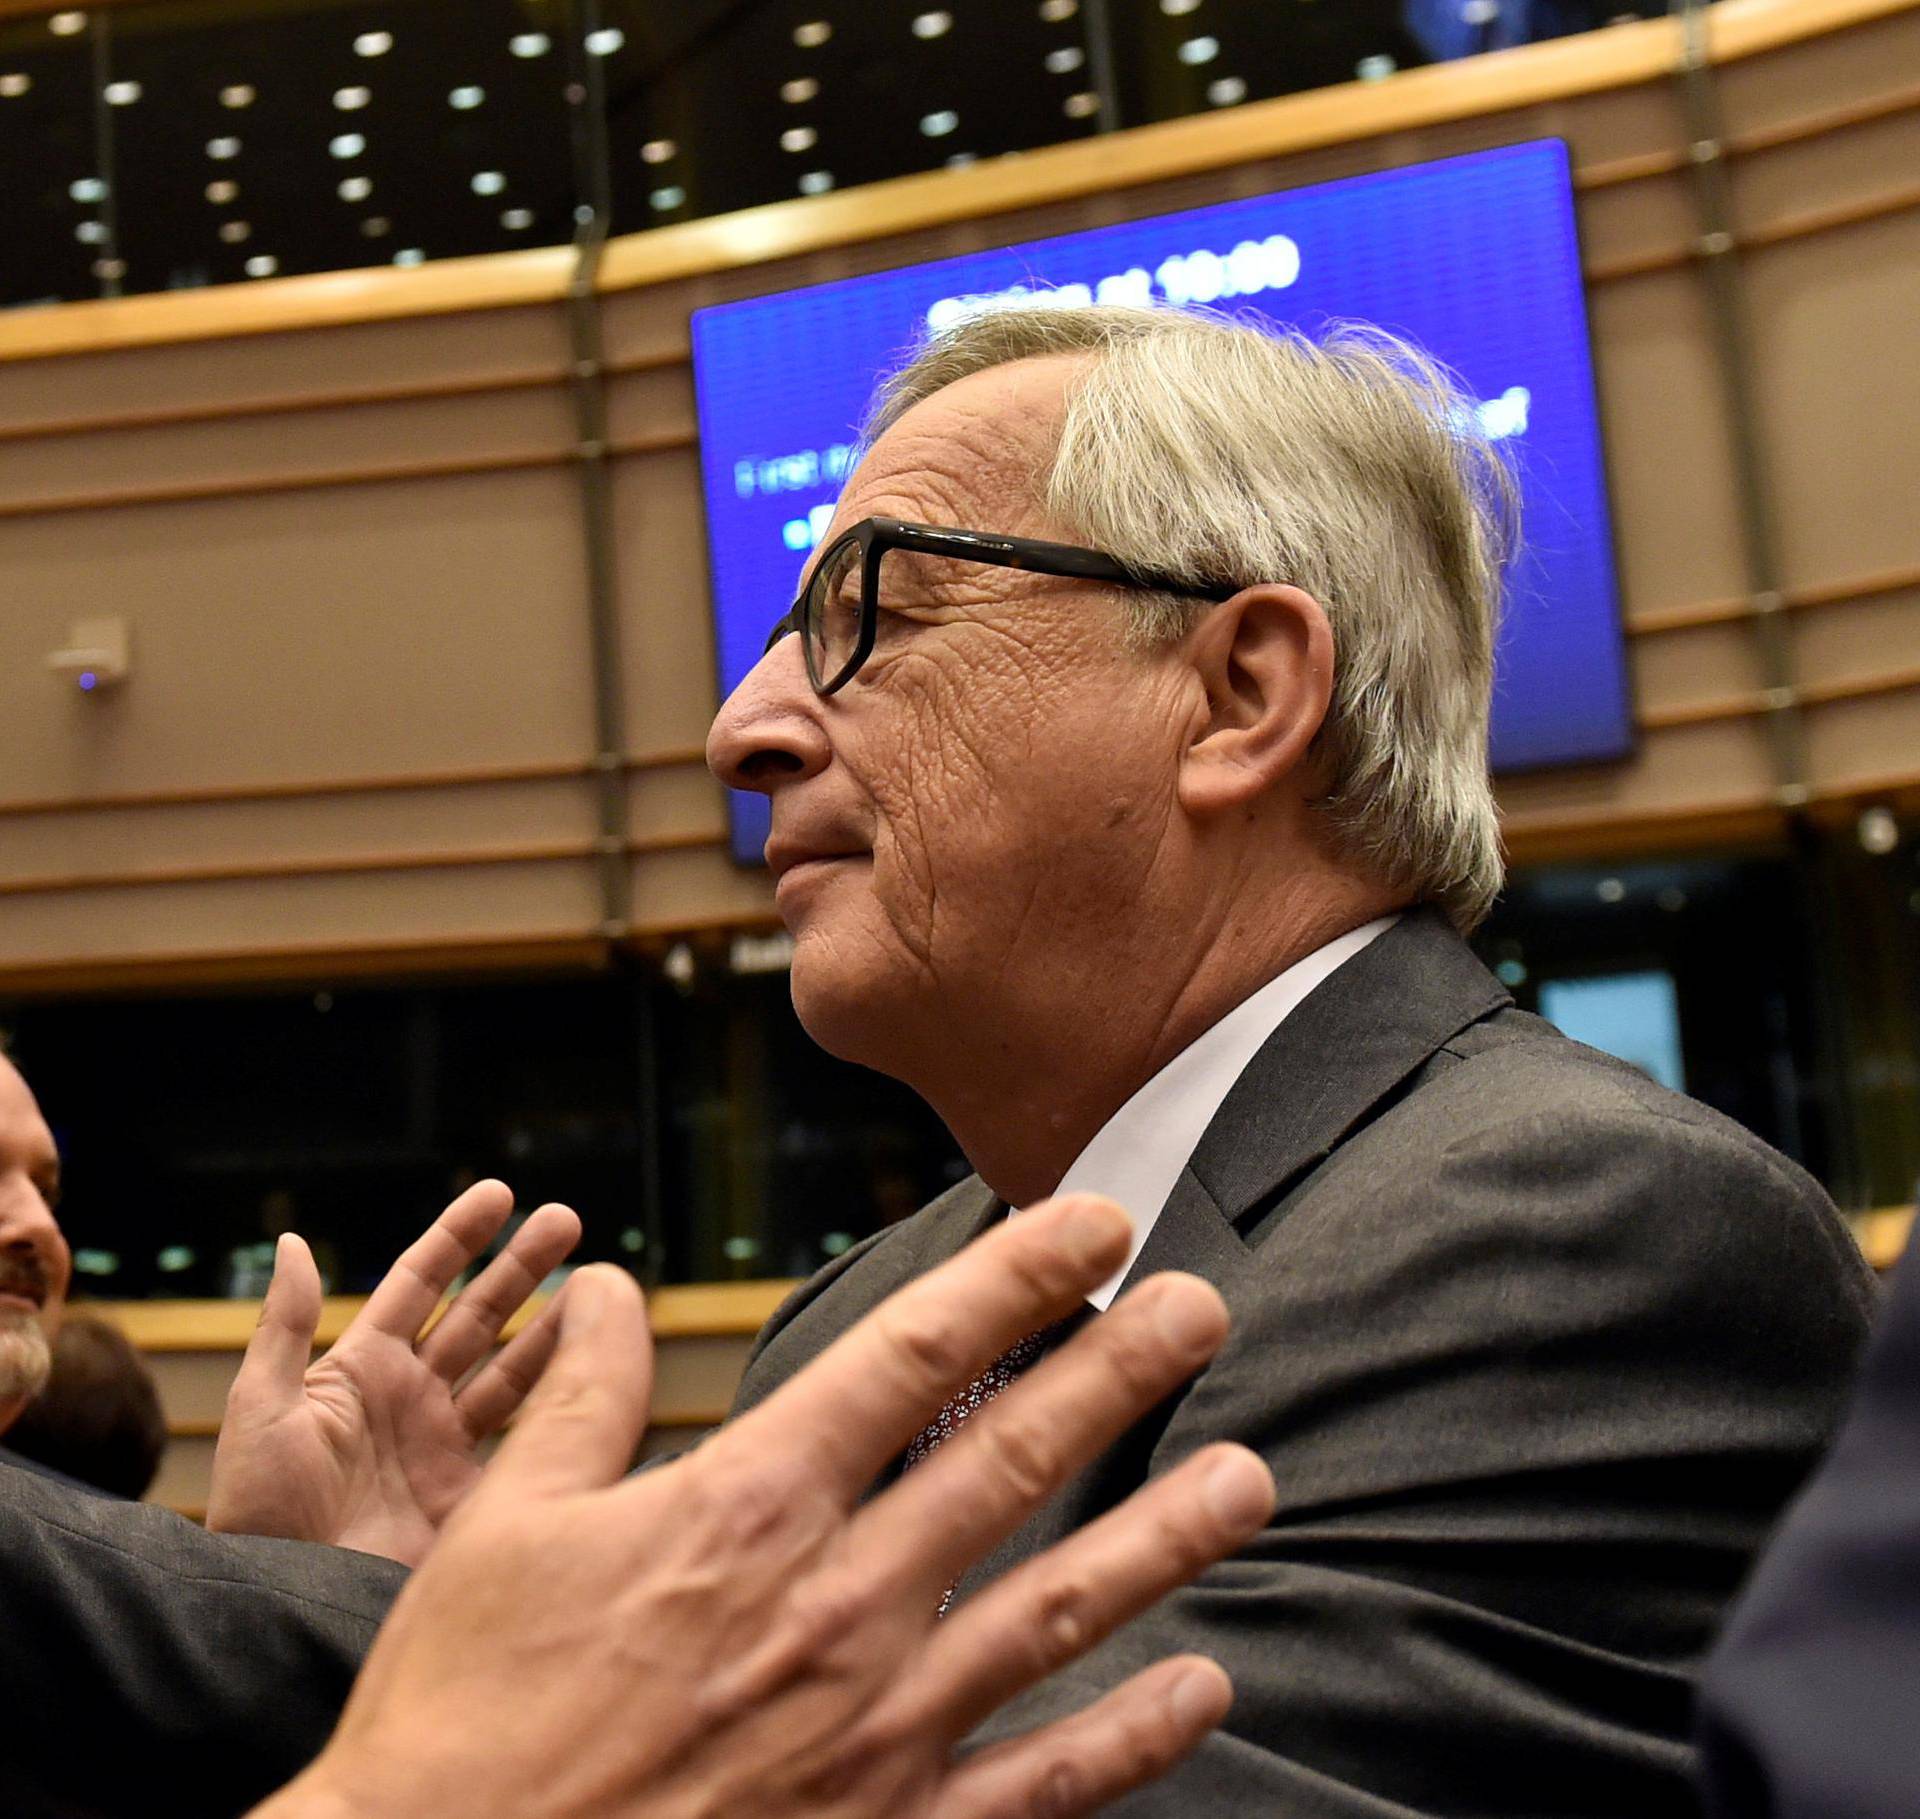 EC President Juncker welcomes Farage, the leader of the UKIP, prior to a plenary session at the European Parliament on the outcome of the "Brexit" in Brussels